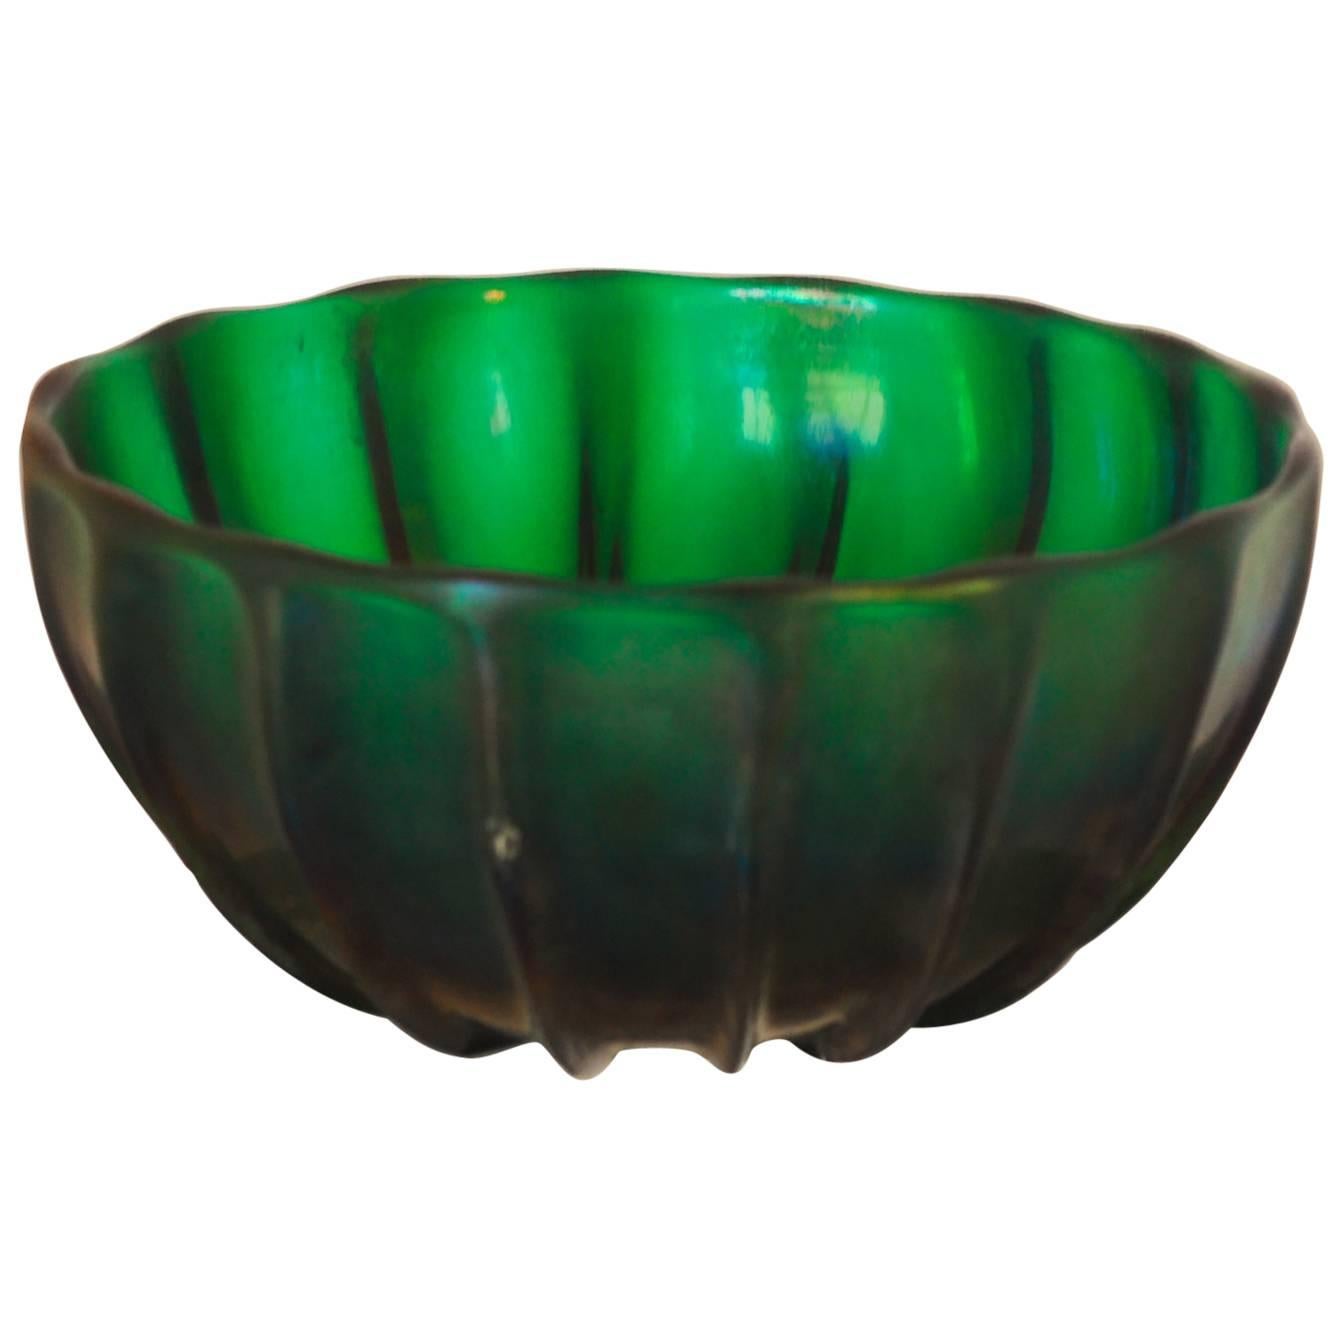 Archimede Seguso Signed Bowl, Green Glass with Iridescence, Serenella 18 Green For Sale